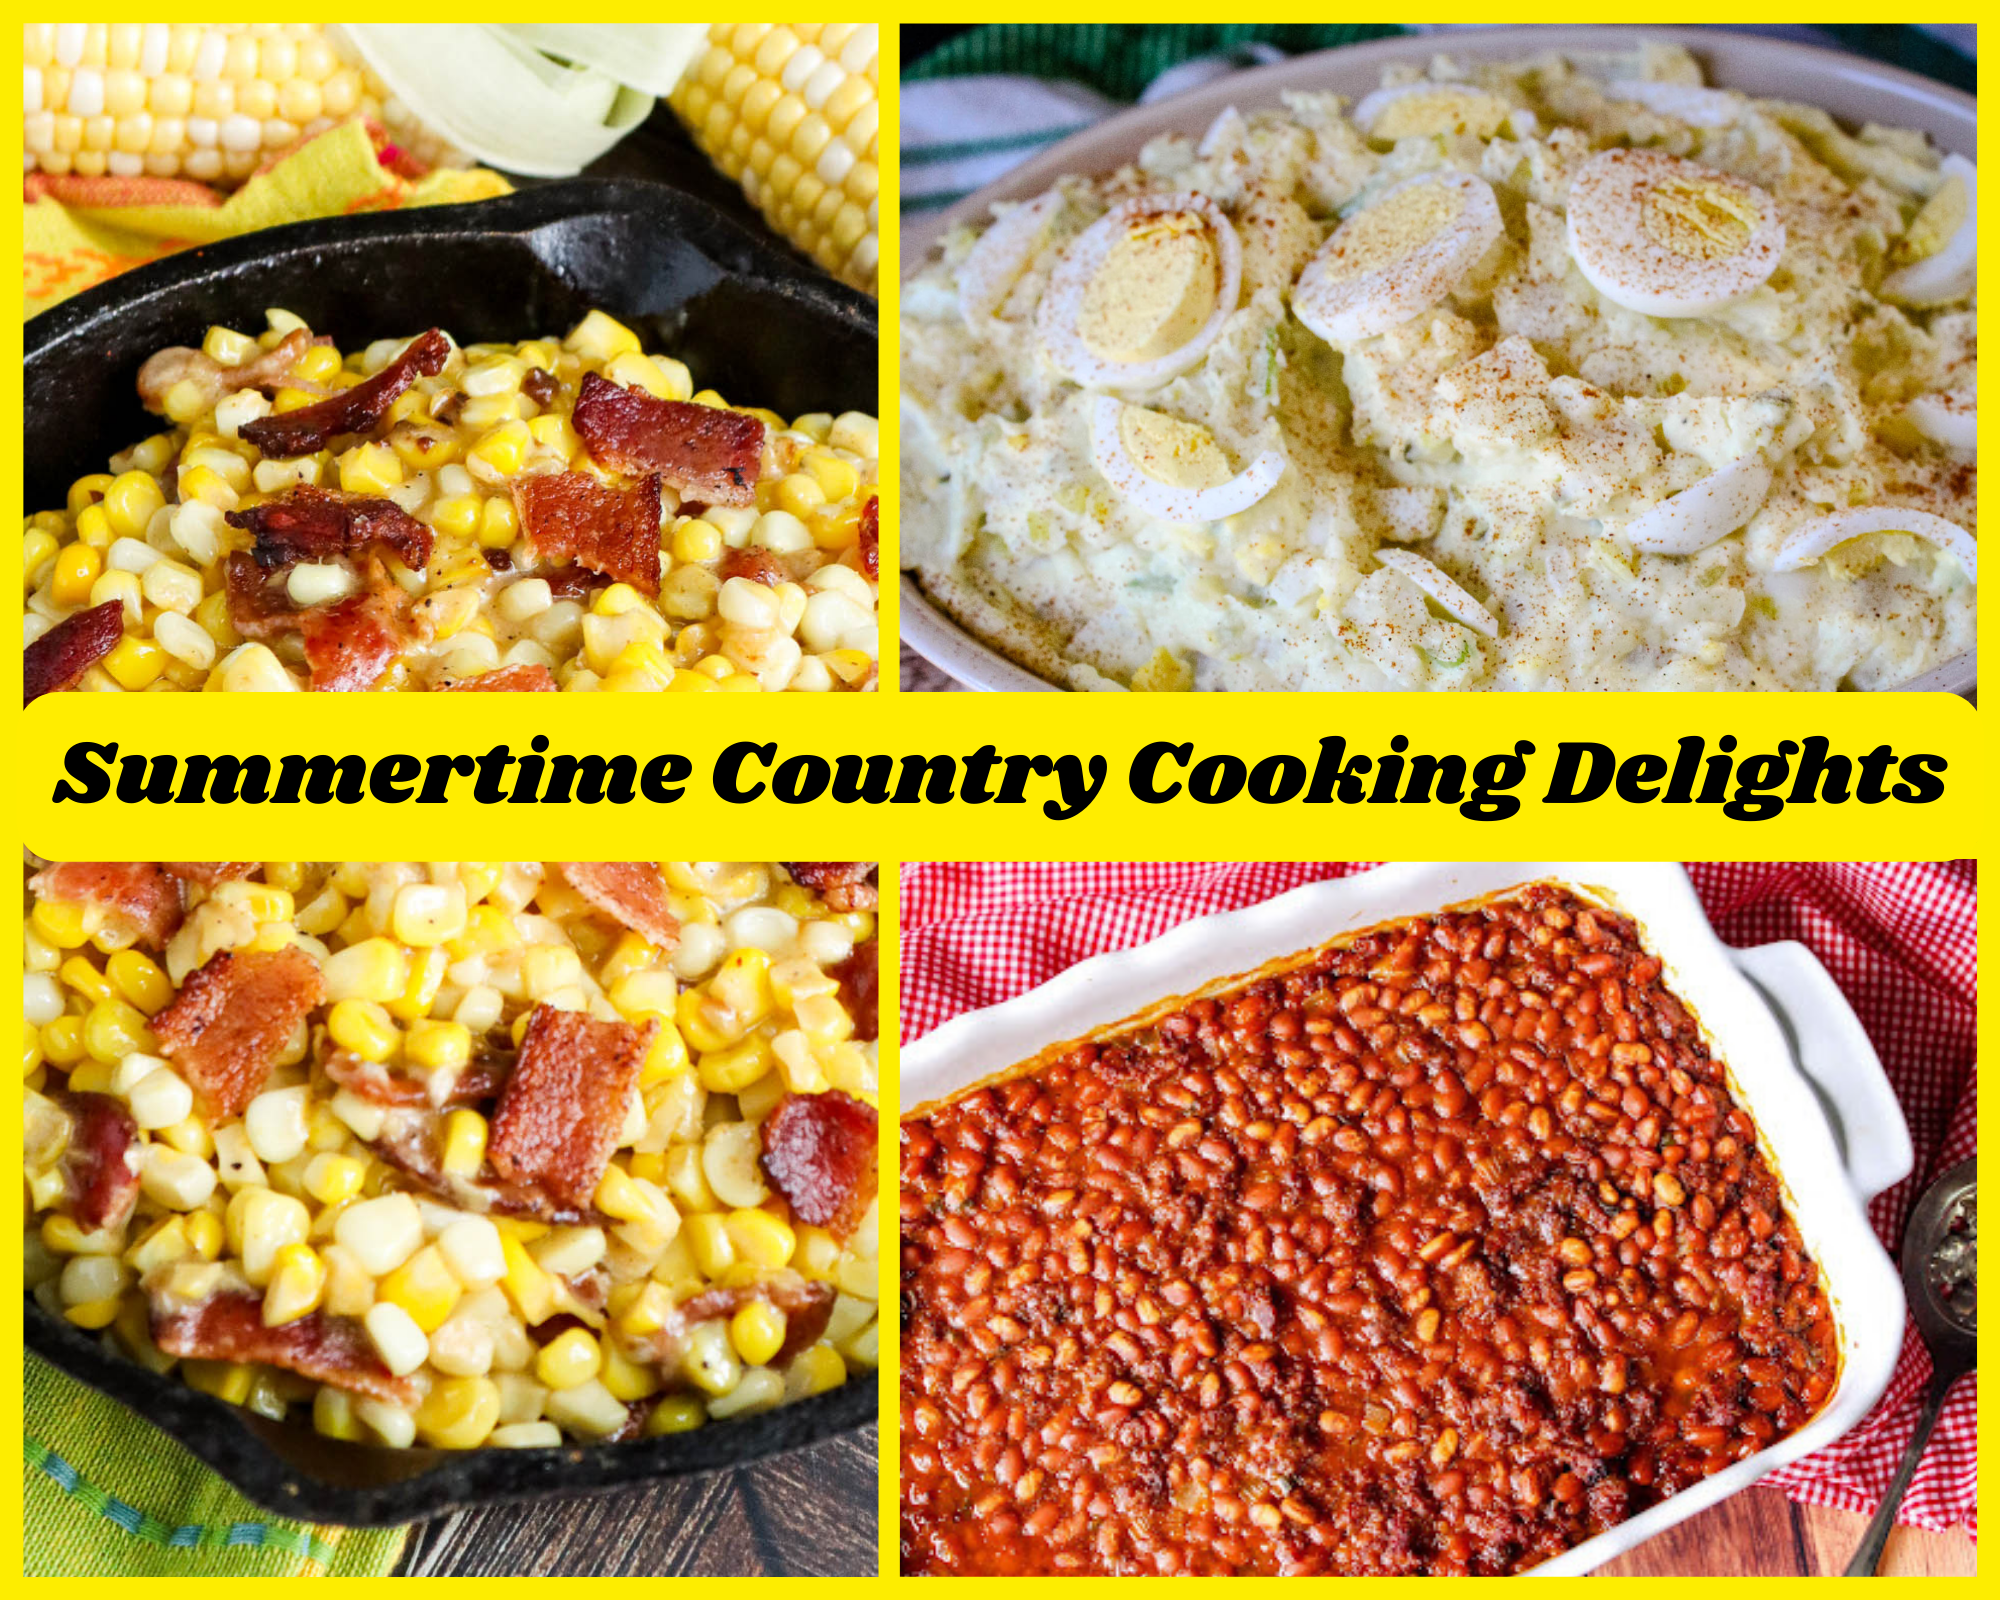 Summertime Country Cooking Delights